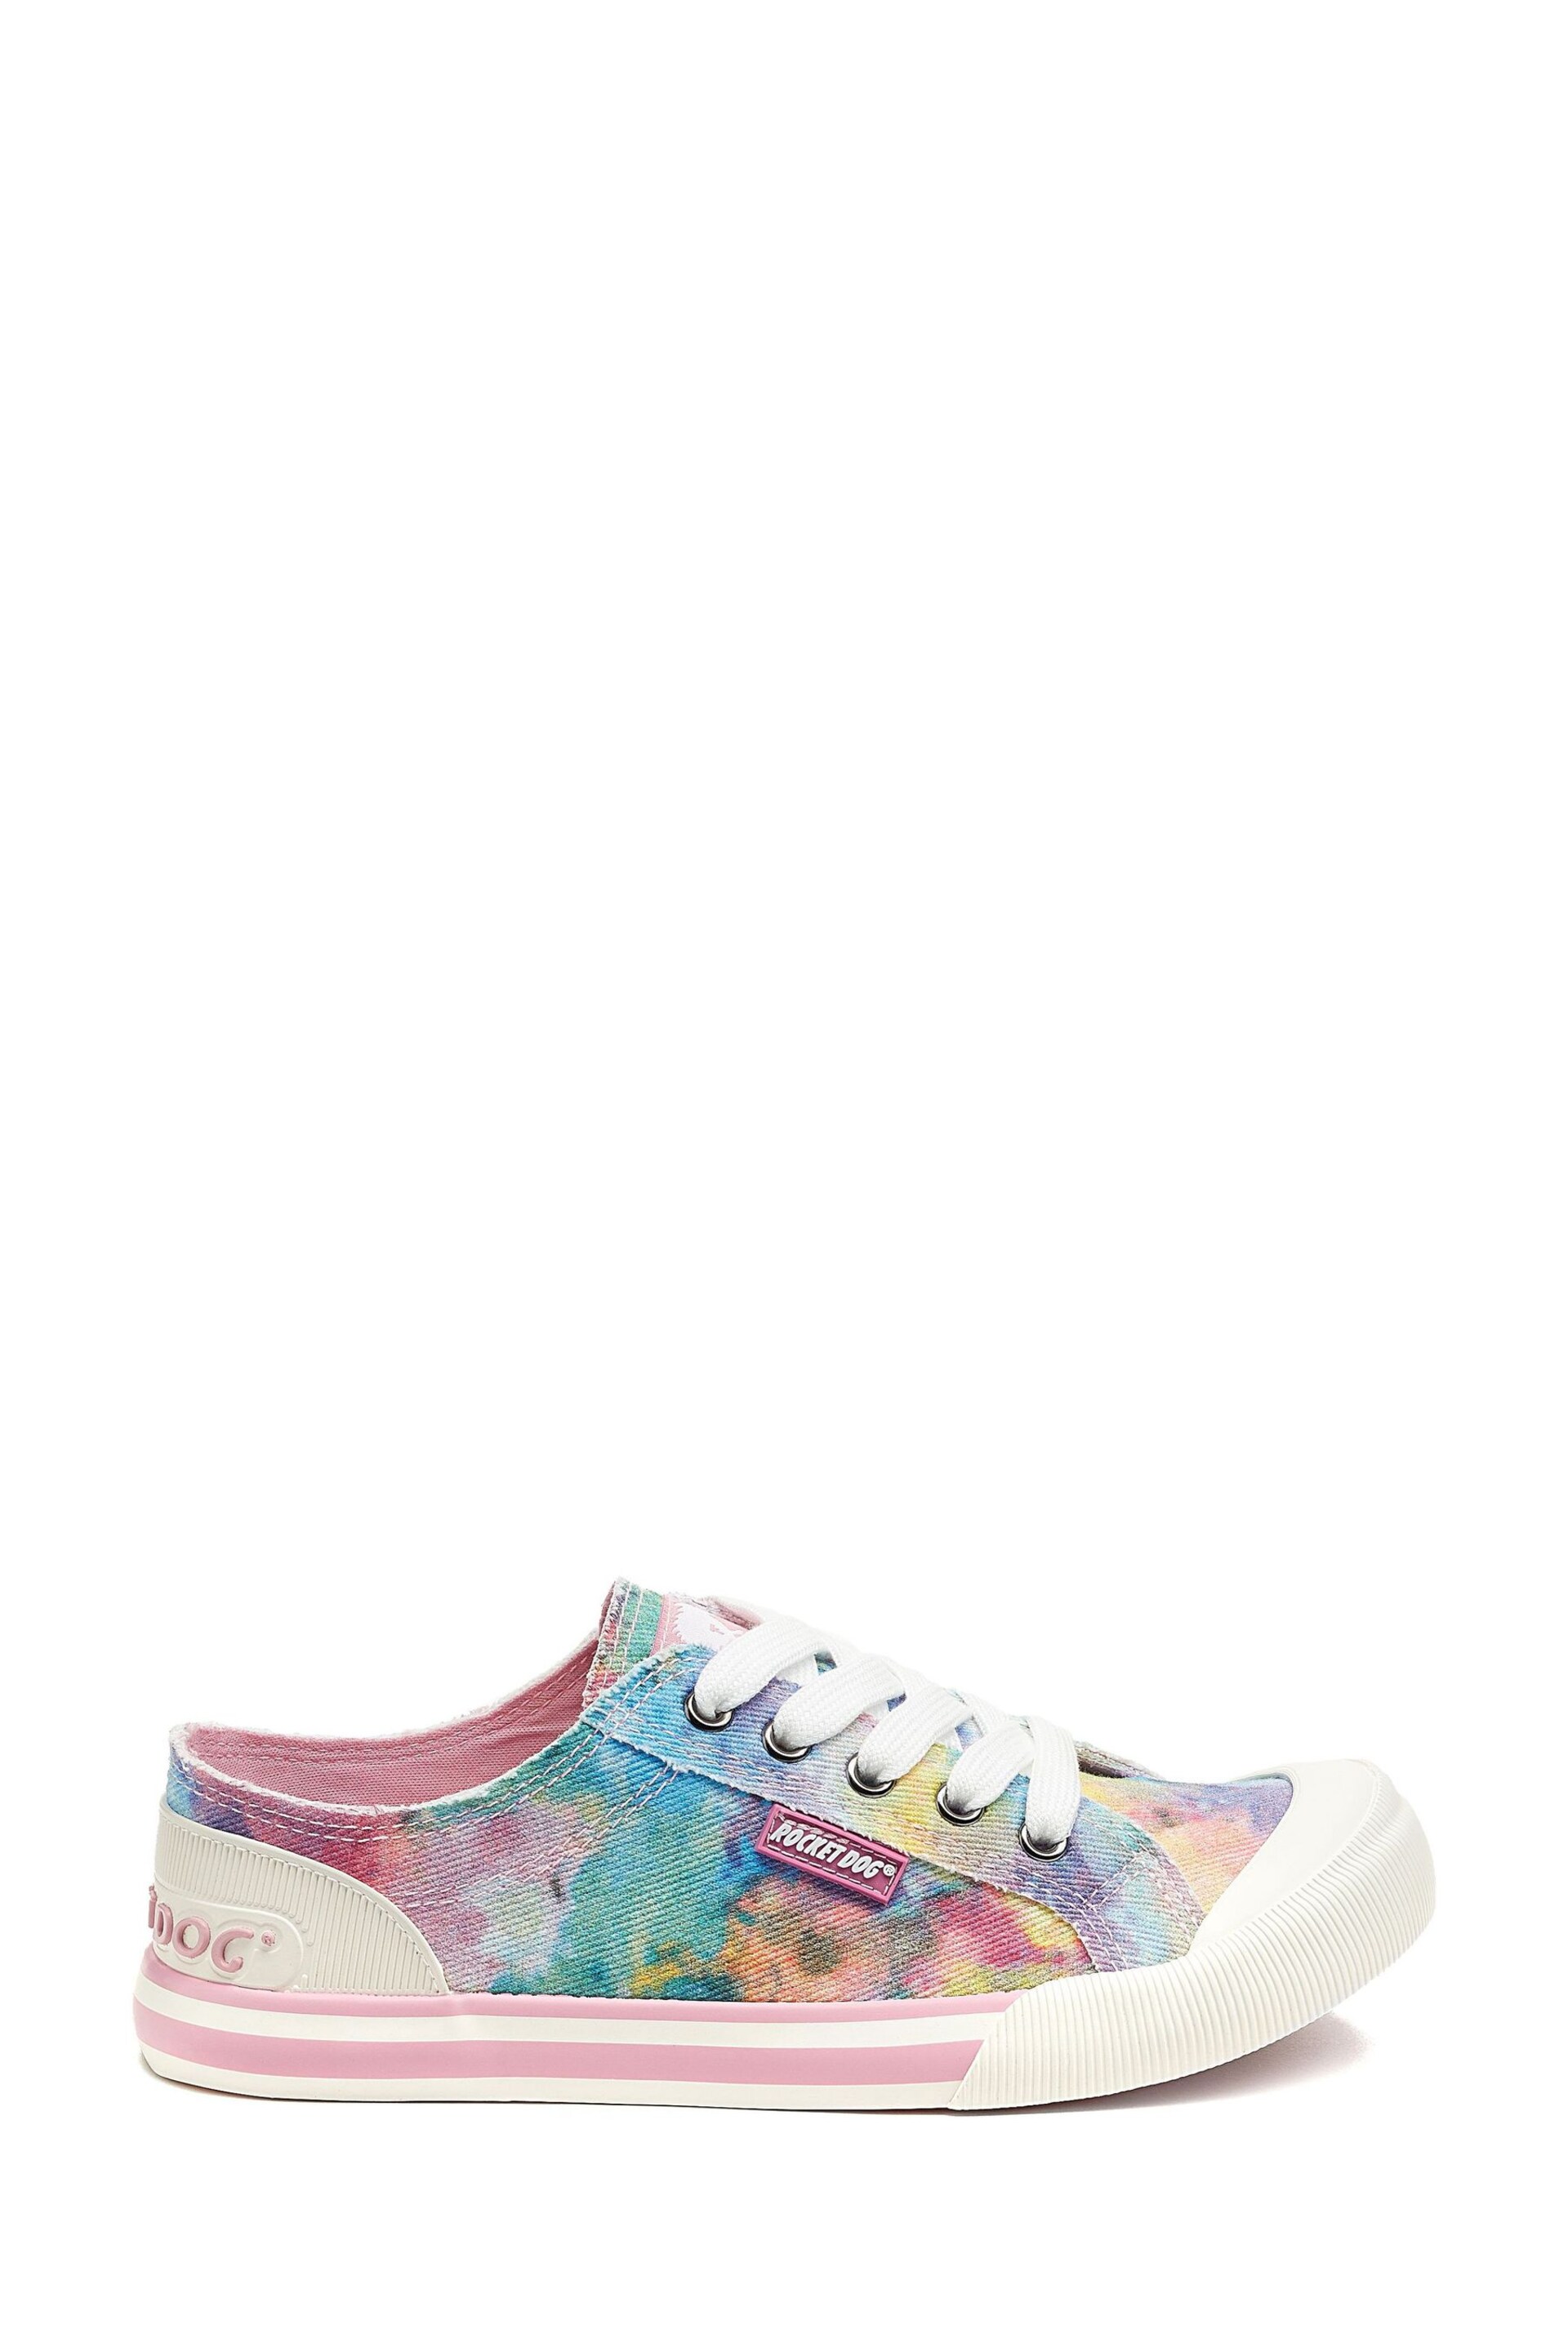 Rocket Dog Pink Jazzin Candy Tie Dye Cotton Trainers - Image 2 of 3